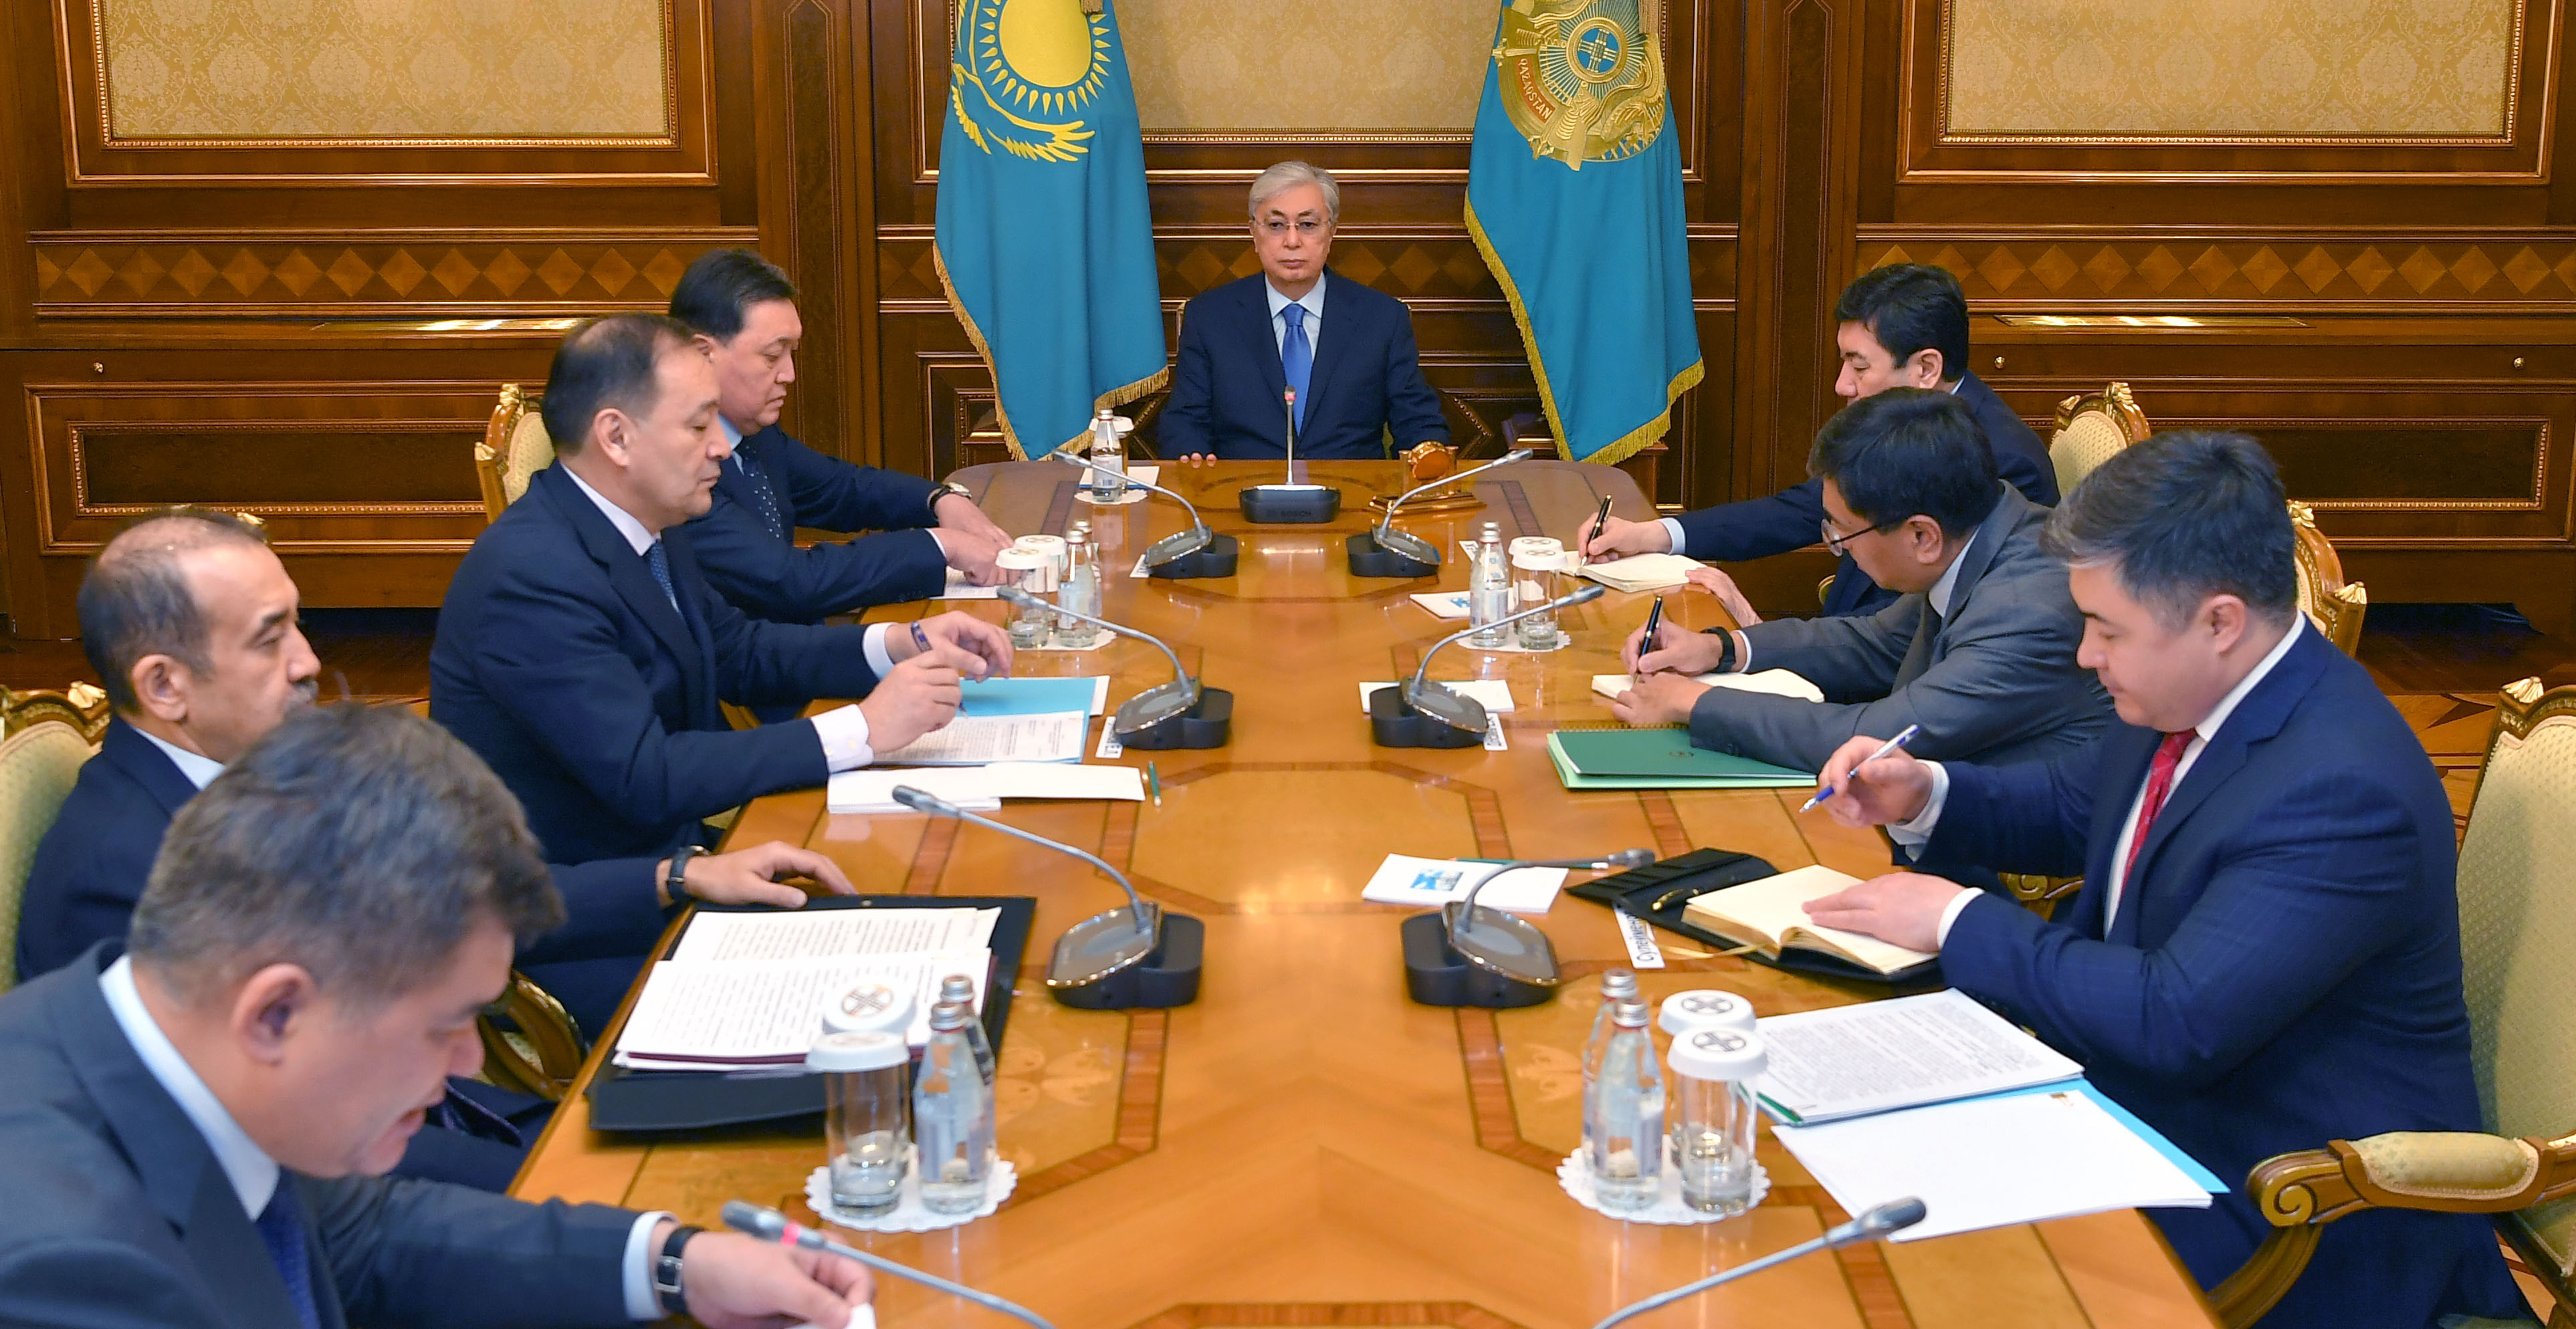 President Tokayev holds a meeting with the heads of a number of state bodies